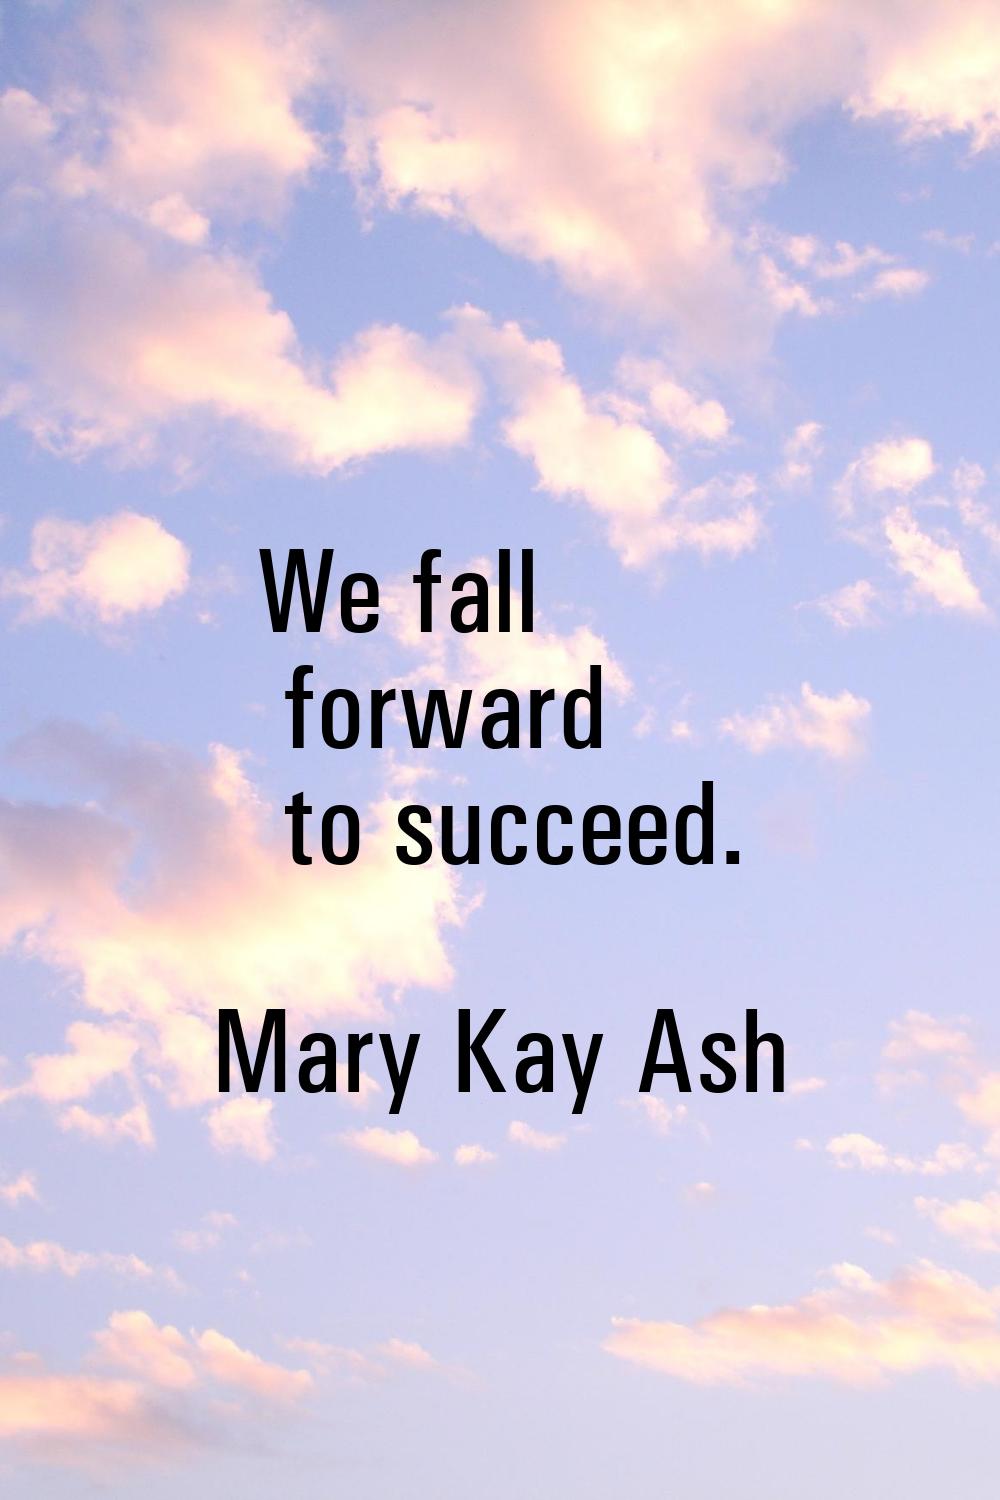 We fall forward to succeed.